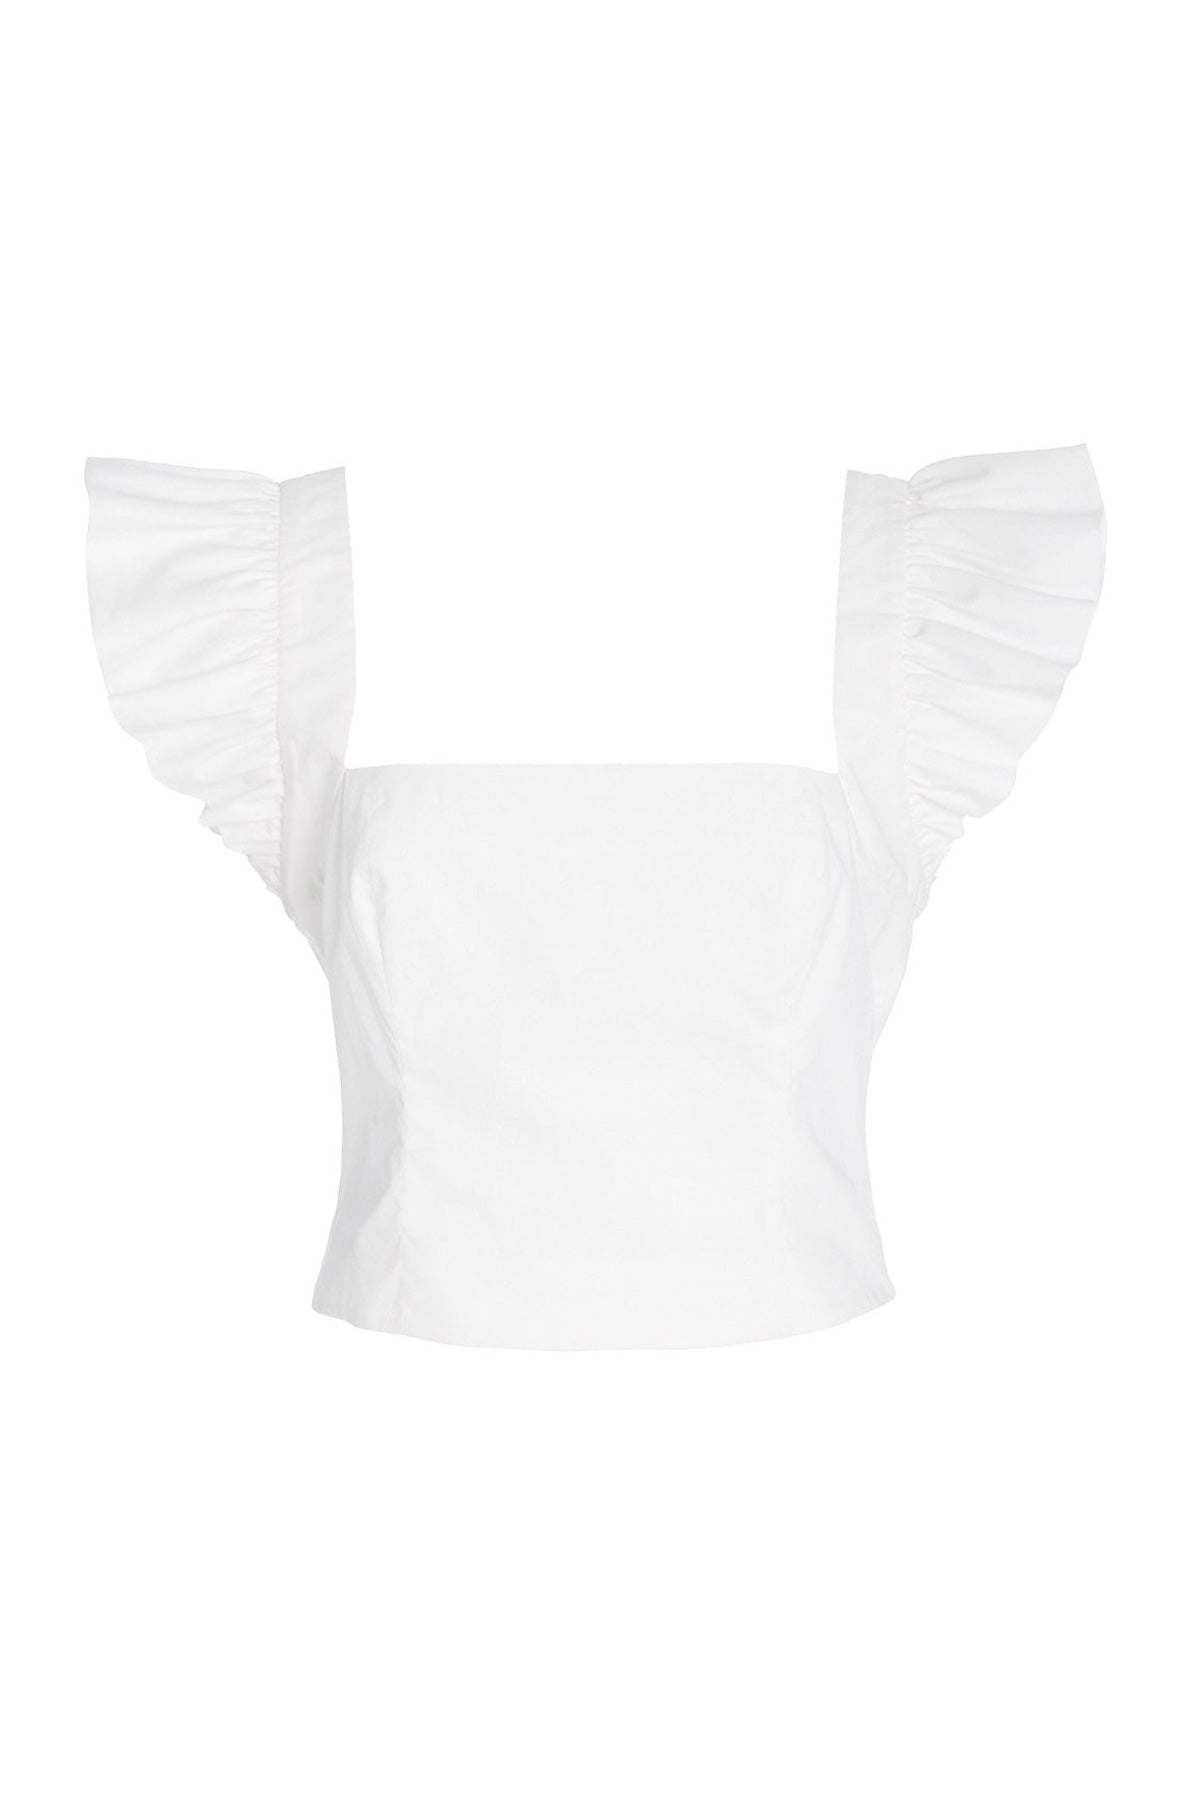 Hyannis Top in White - shop-olivia.com